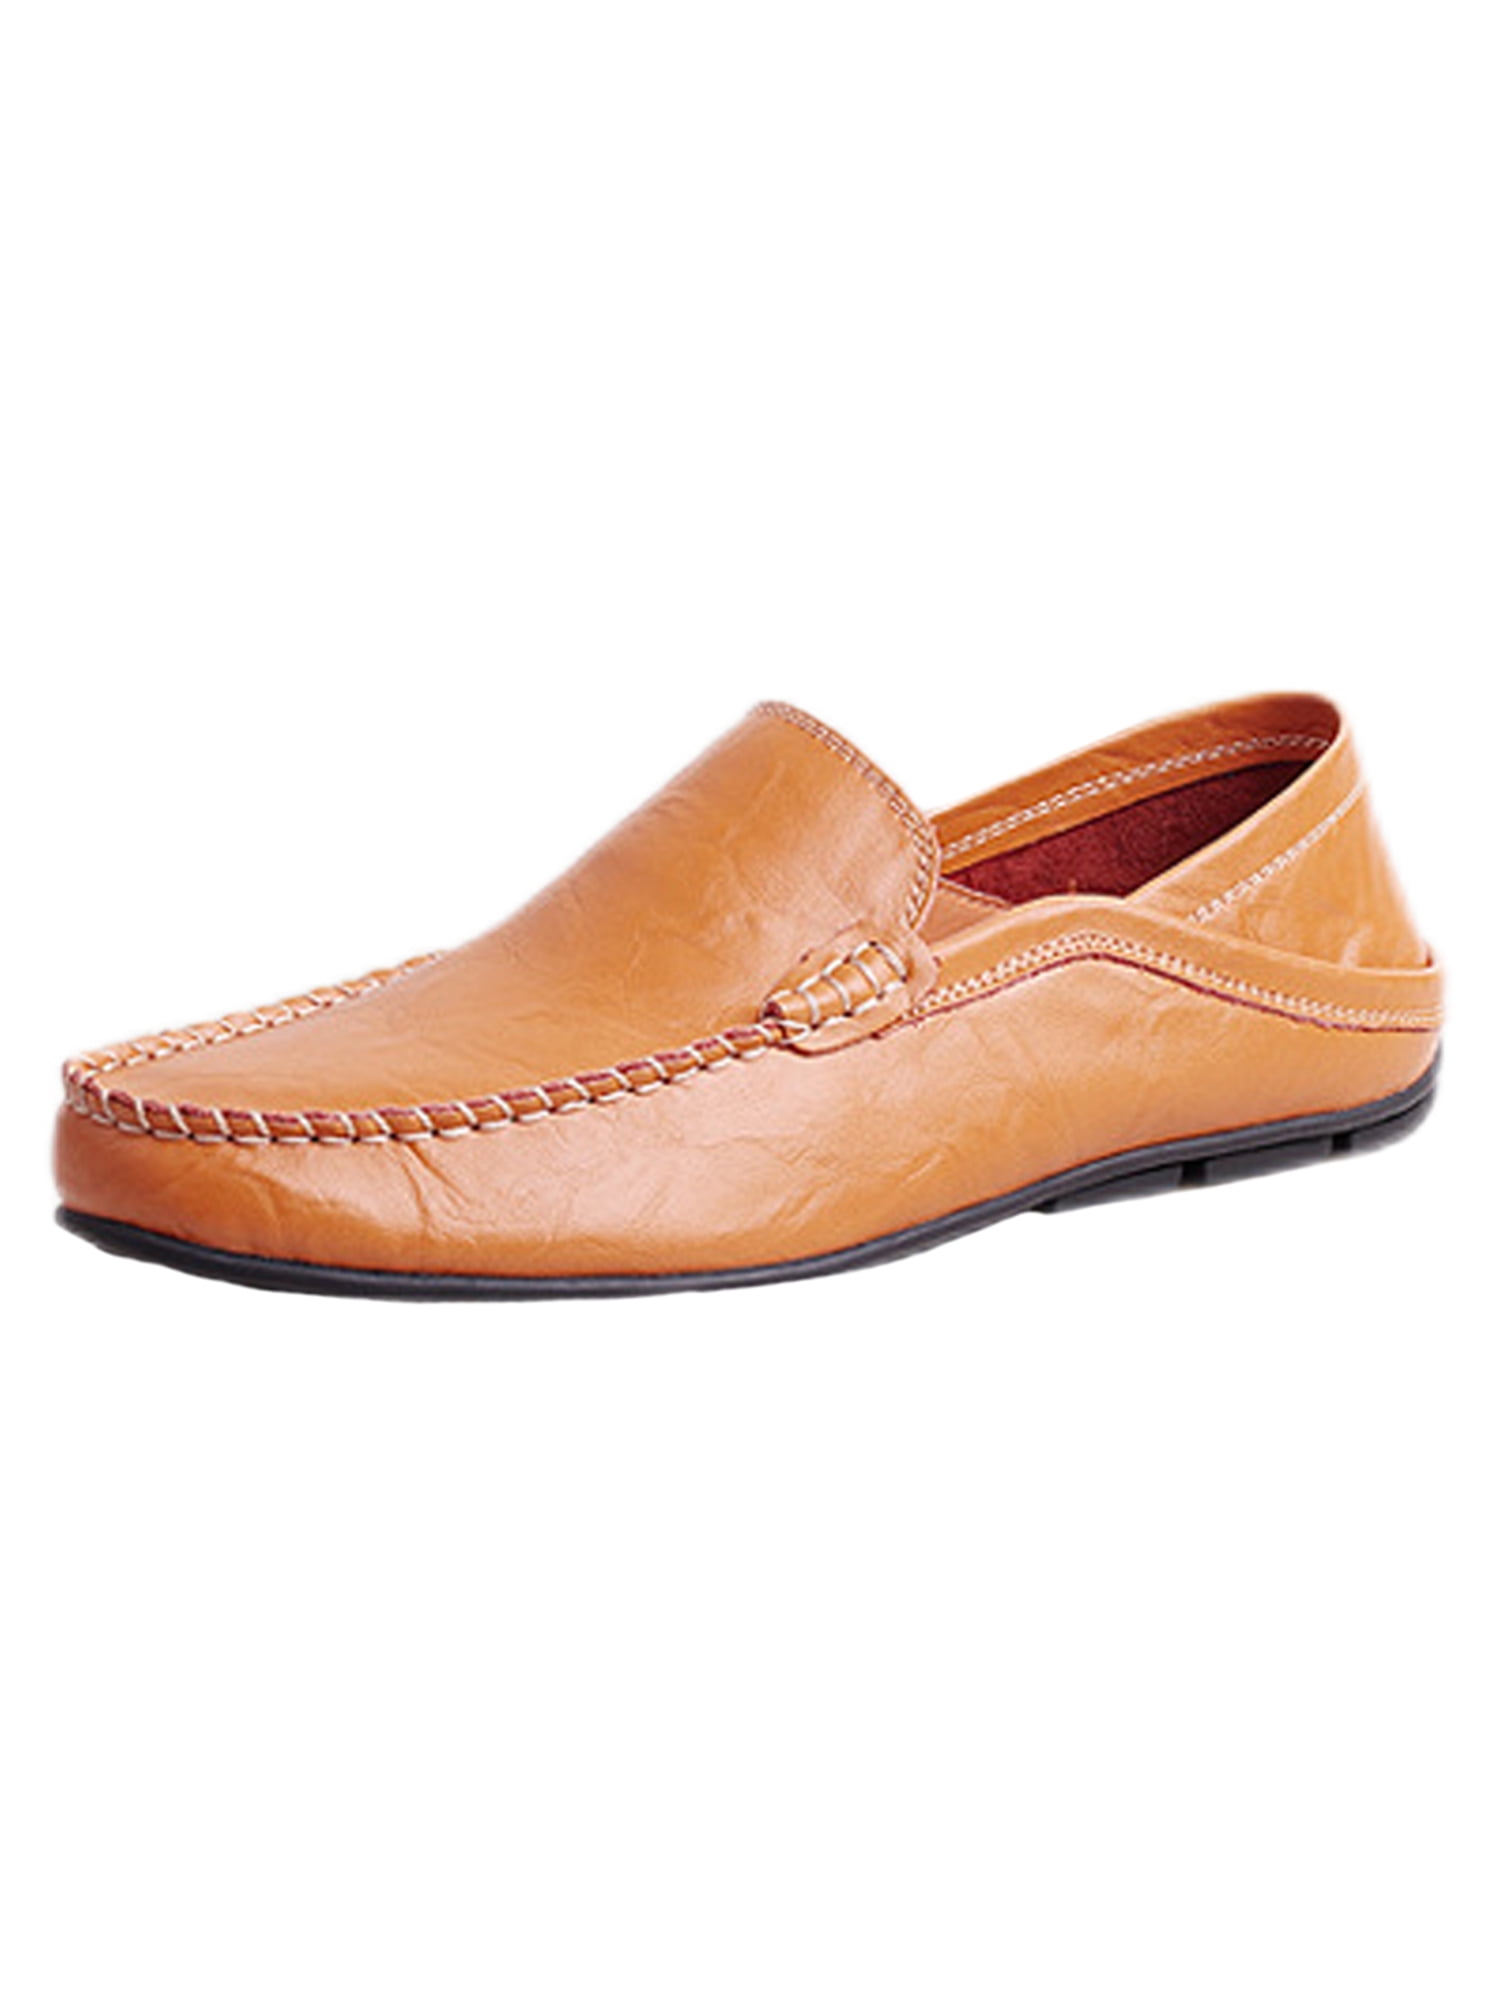 UUBARIS Men's Formal Leather Loafers for Work Office